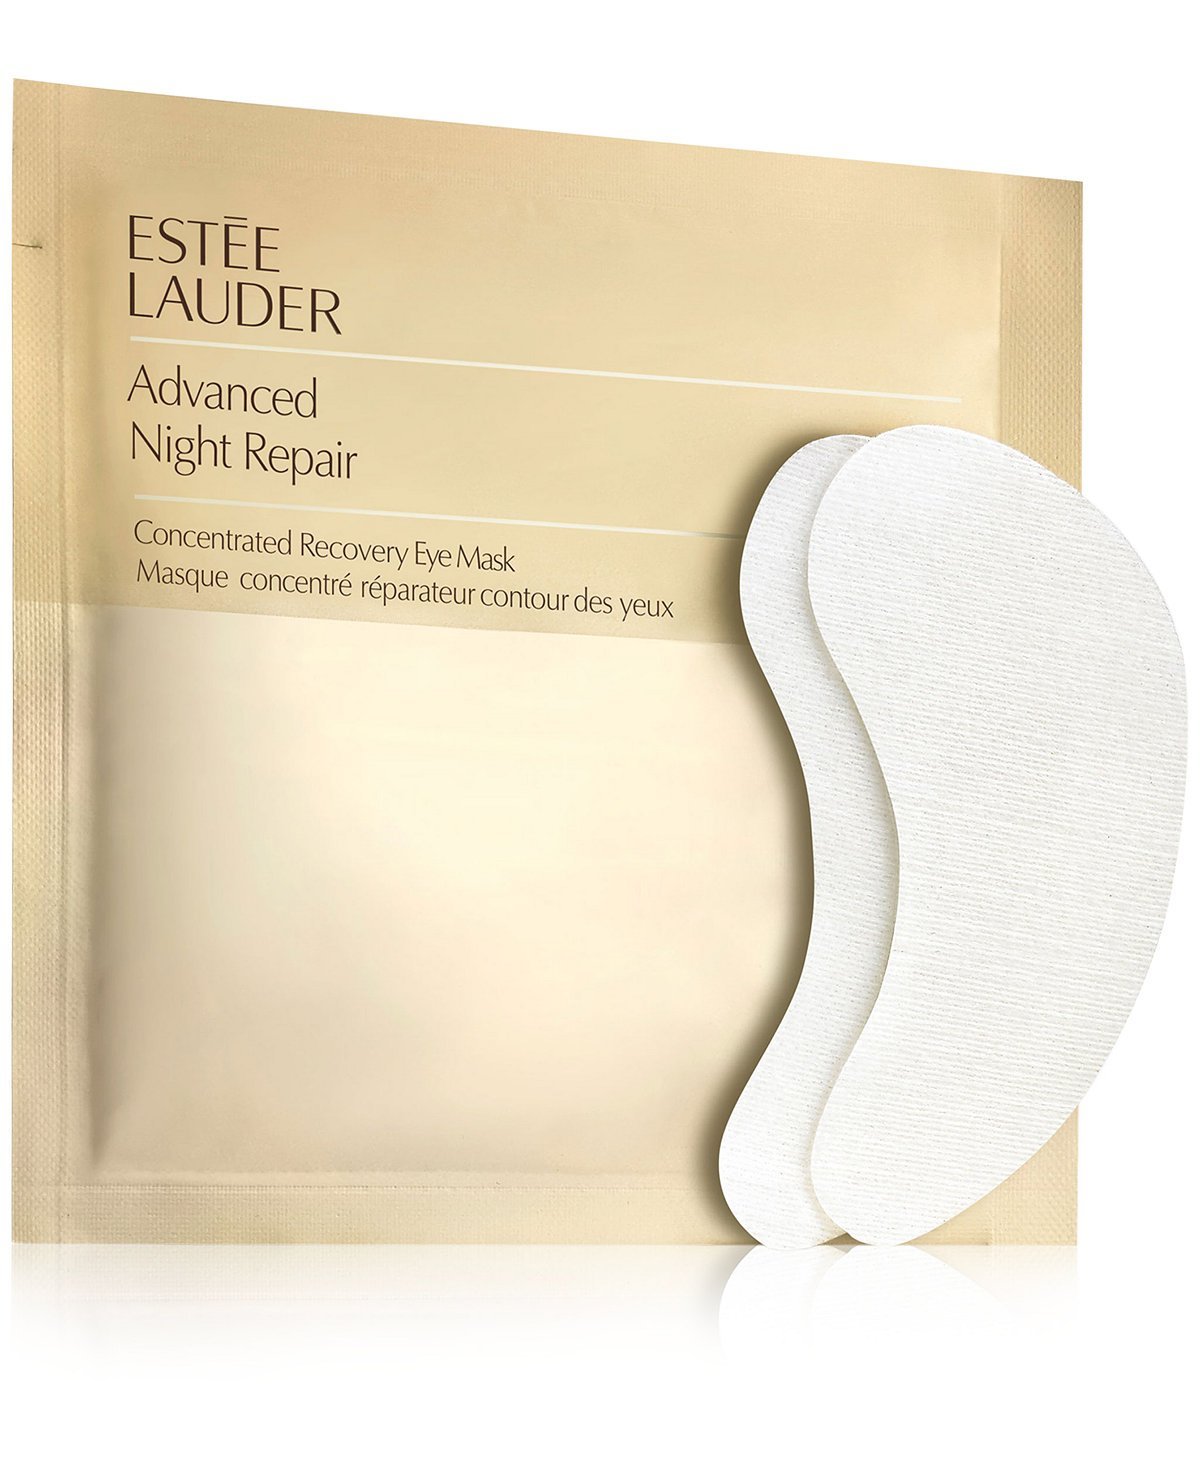 Image of Estee Lauder Advanced Night Repair Concentrated Recovery Eye Mask 1 Unità 971952205